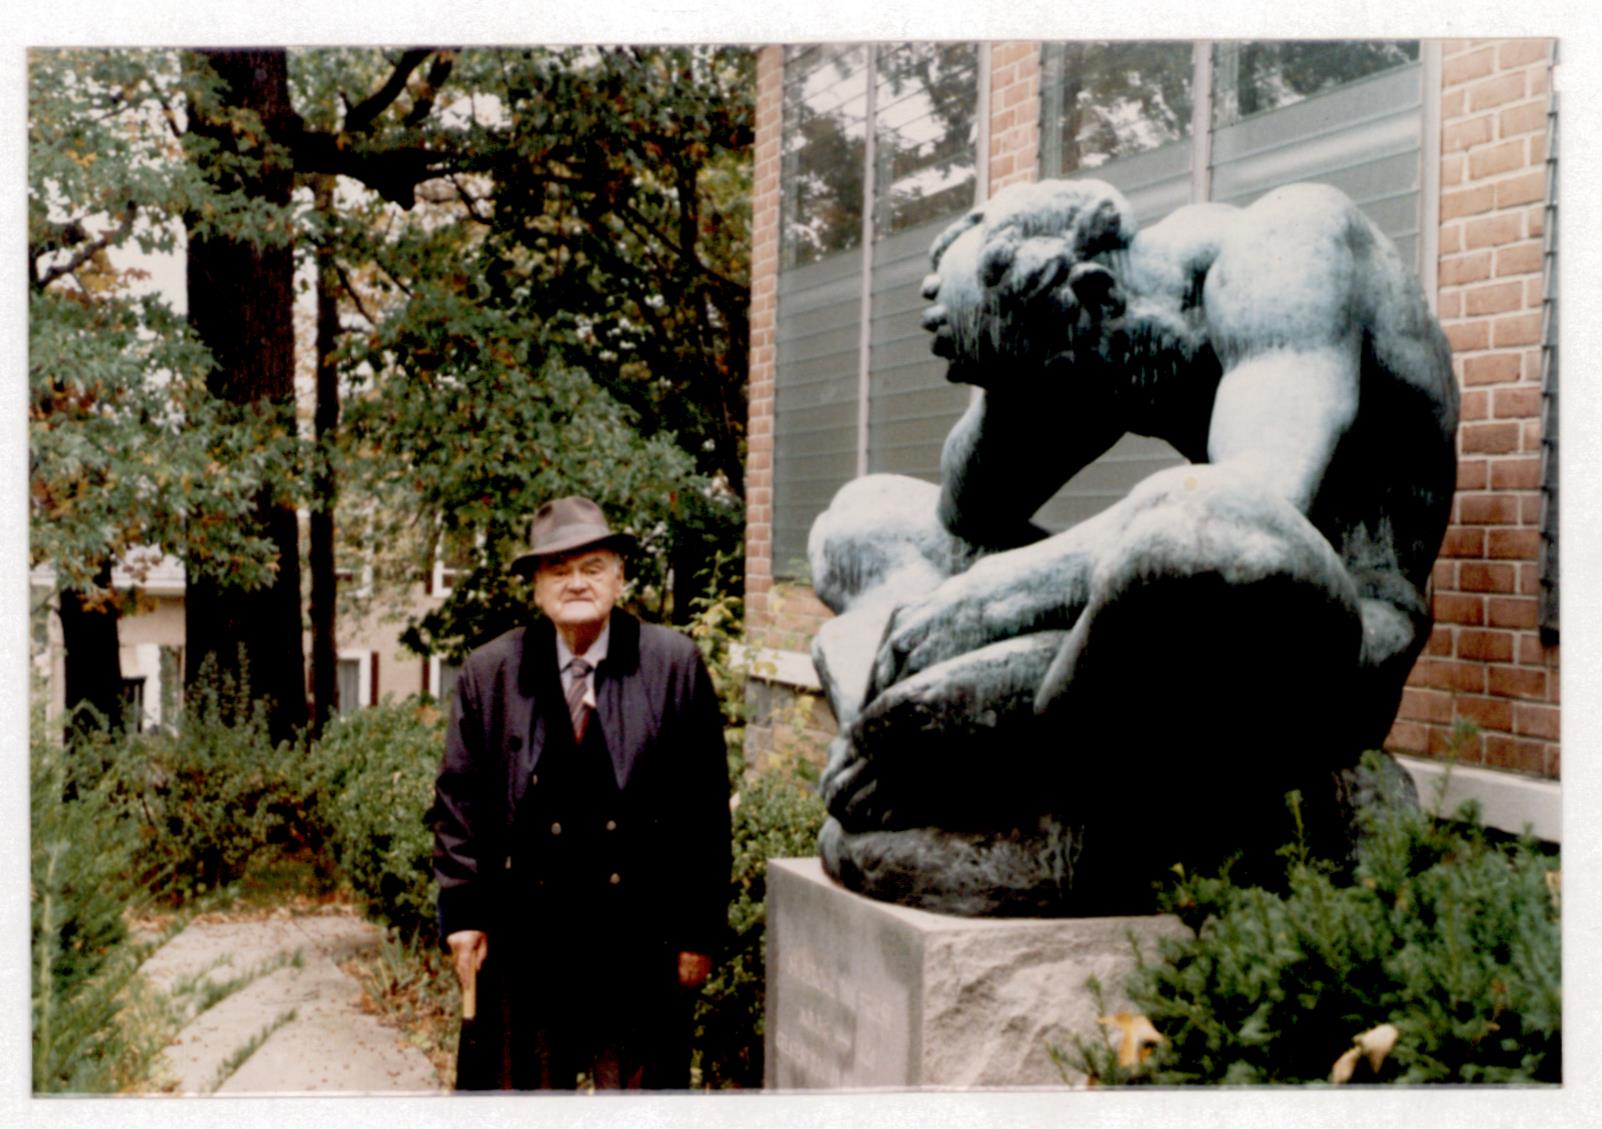 Bogdan Radica in front of the statue of Saint Jerome of Dalmatia in the 1980's in the garden of a Franciscan Monastery in Washington. The statue was made by Ivan Mestrović, also a Croatian emigrant. Photo source: HR-HDA-1769, Bogdan Radica Personal Archive Fund, box 36.